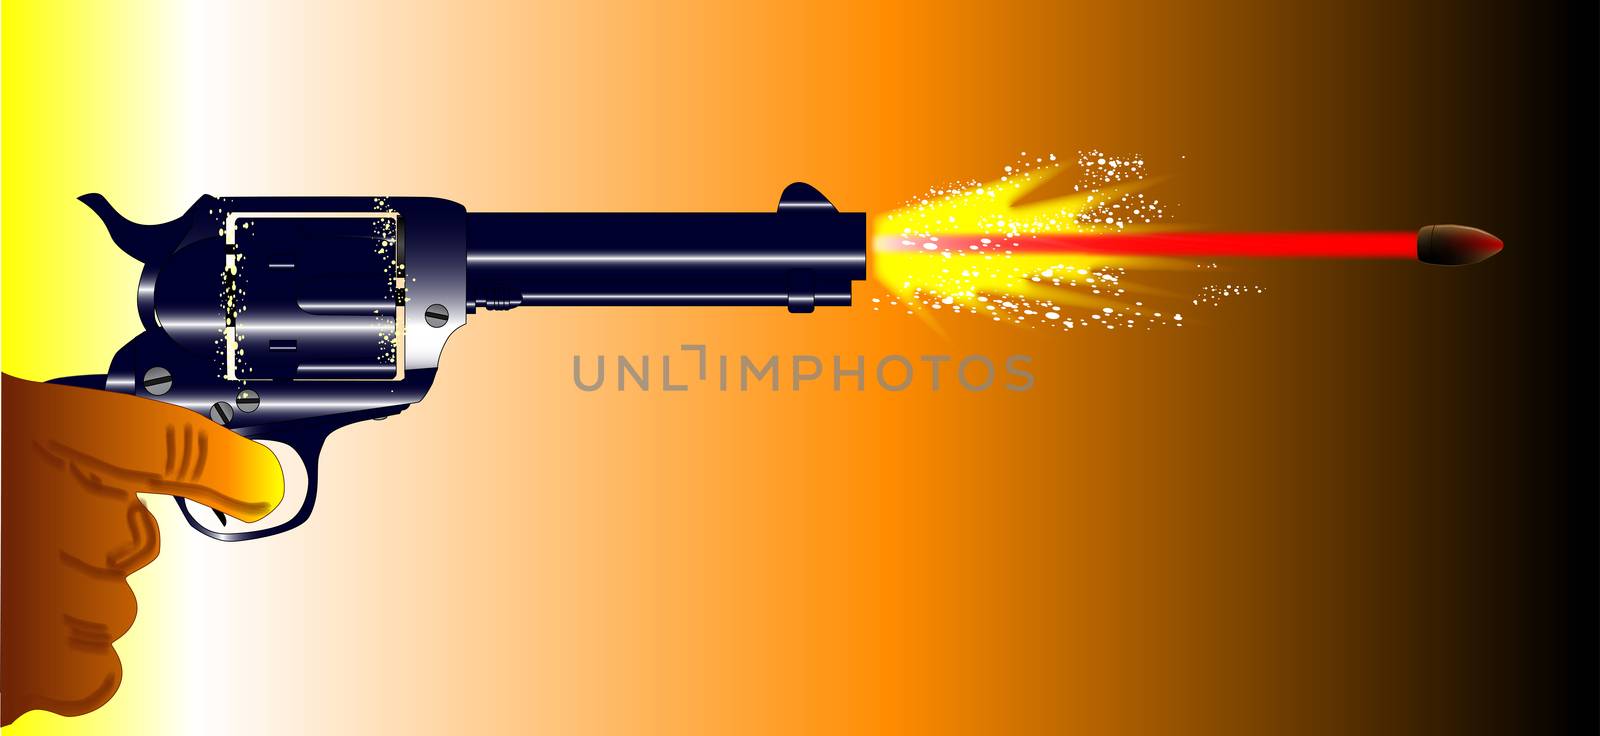 A revolver pistol firing with muzzle flash and speeding bullet.